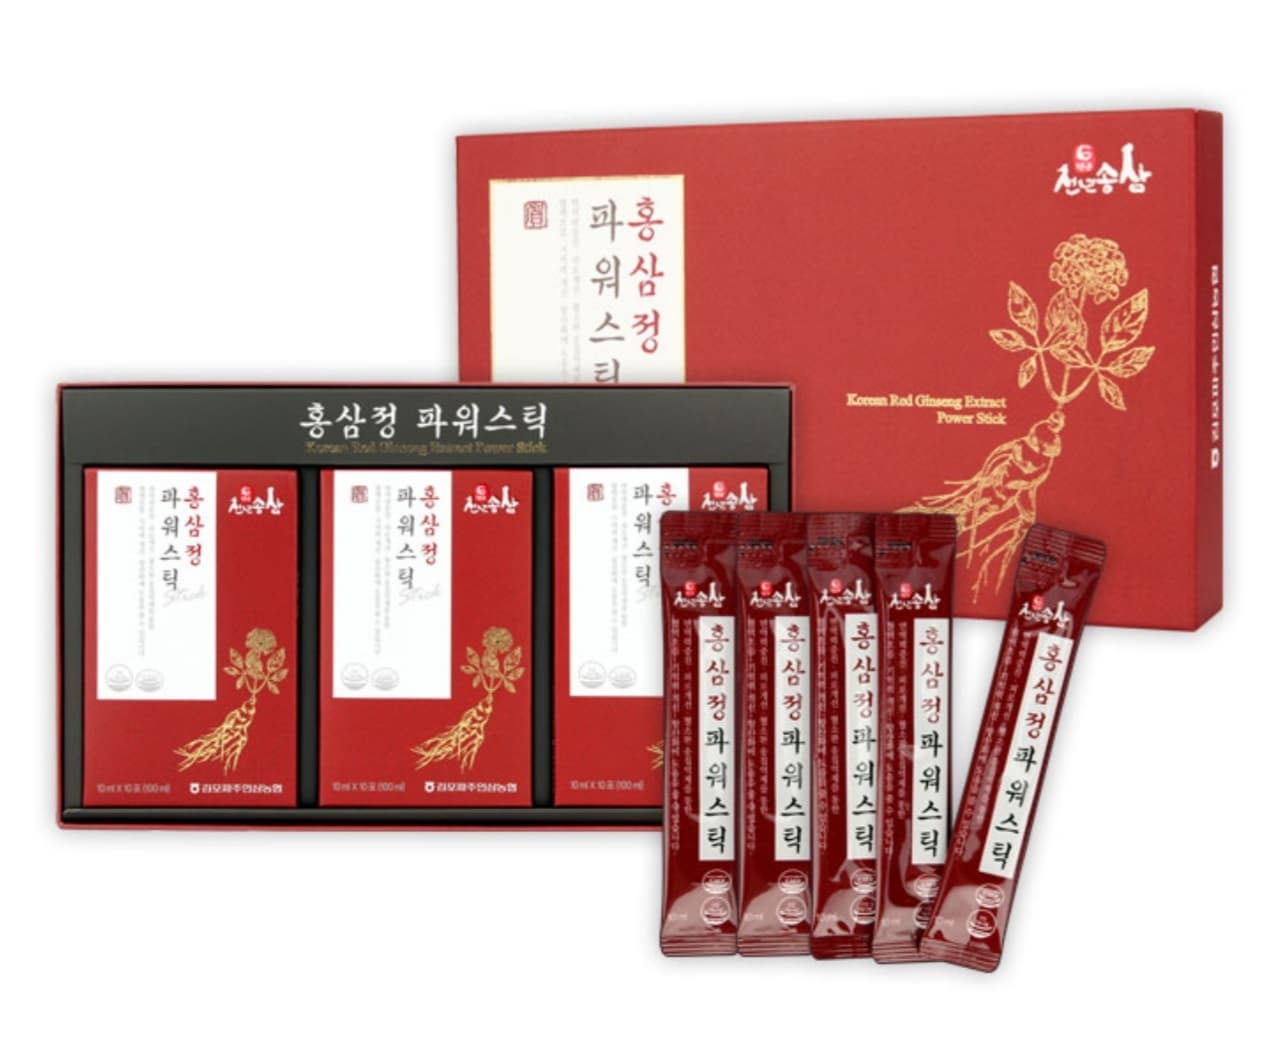 Korean Red Ginseng Extract Power Stick